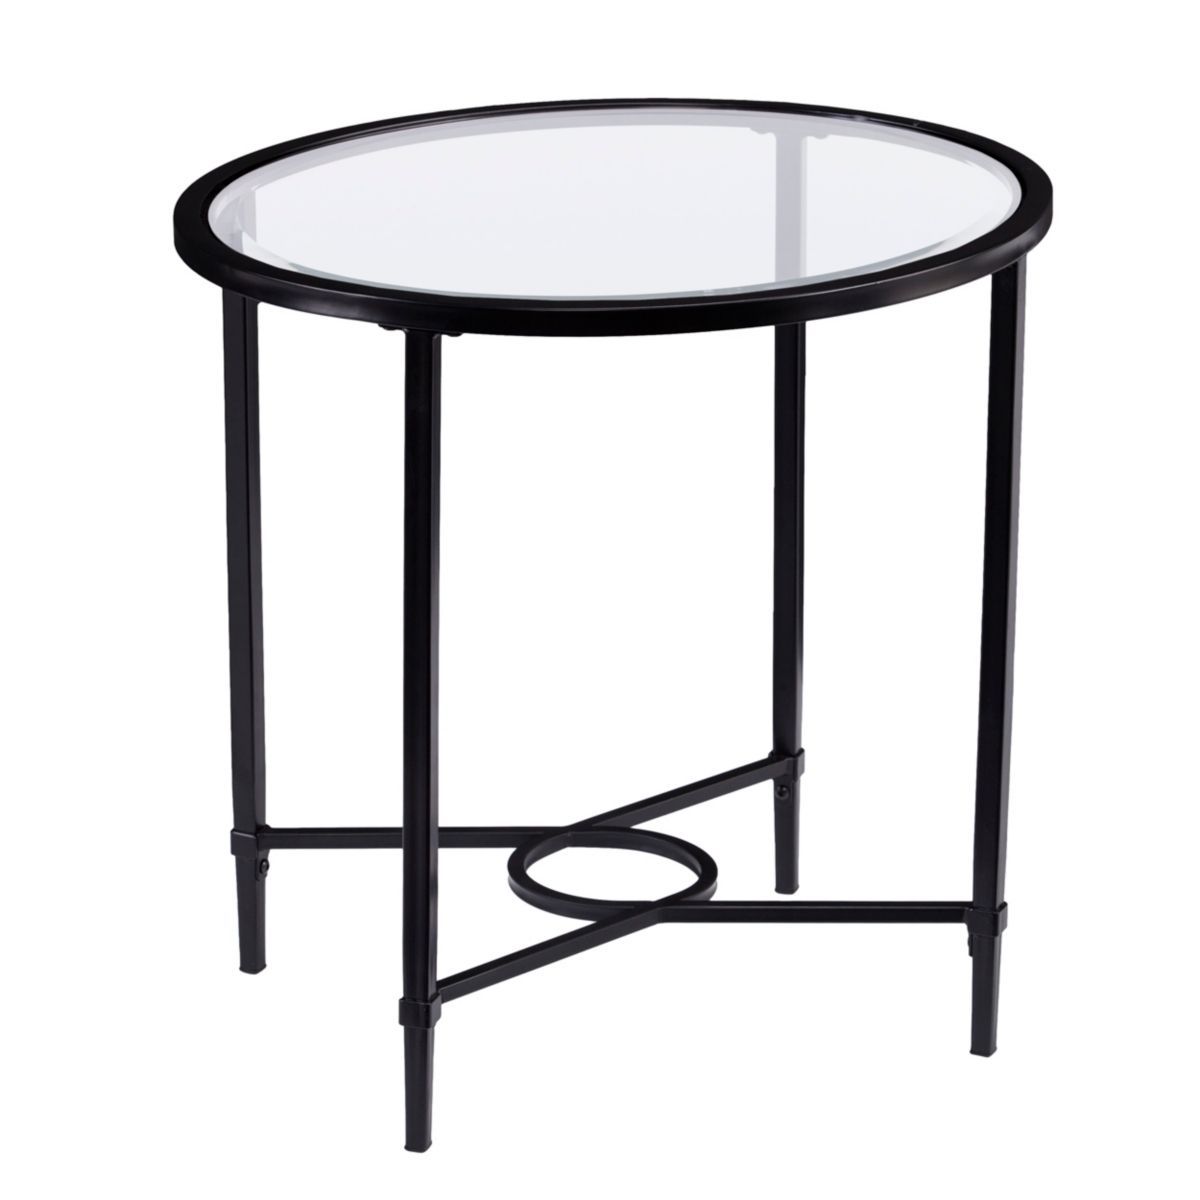 Southern Enterprises Carabella Metal And Glass Oval Side Table Throughout Tempered Glass Oval Side Tables (View 18 of 20)